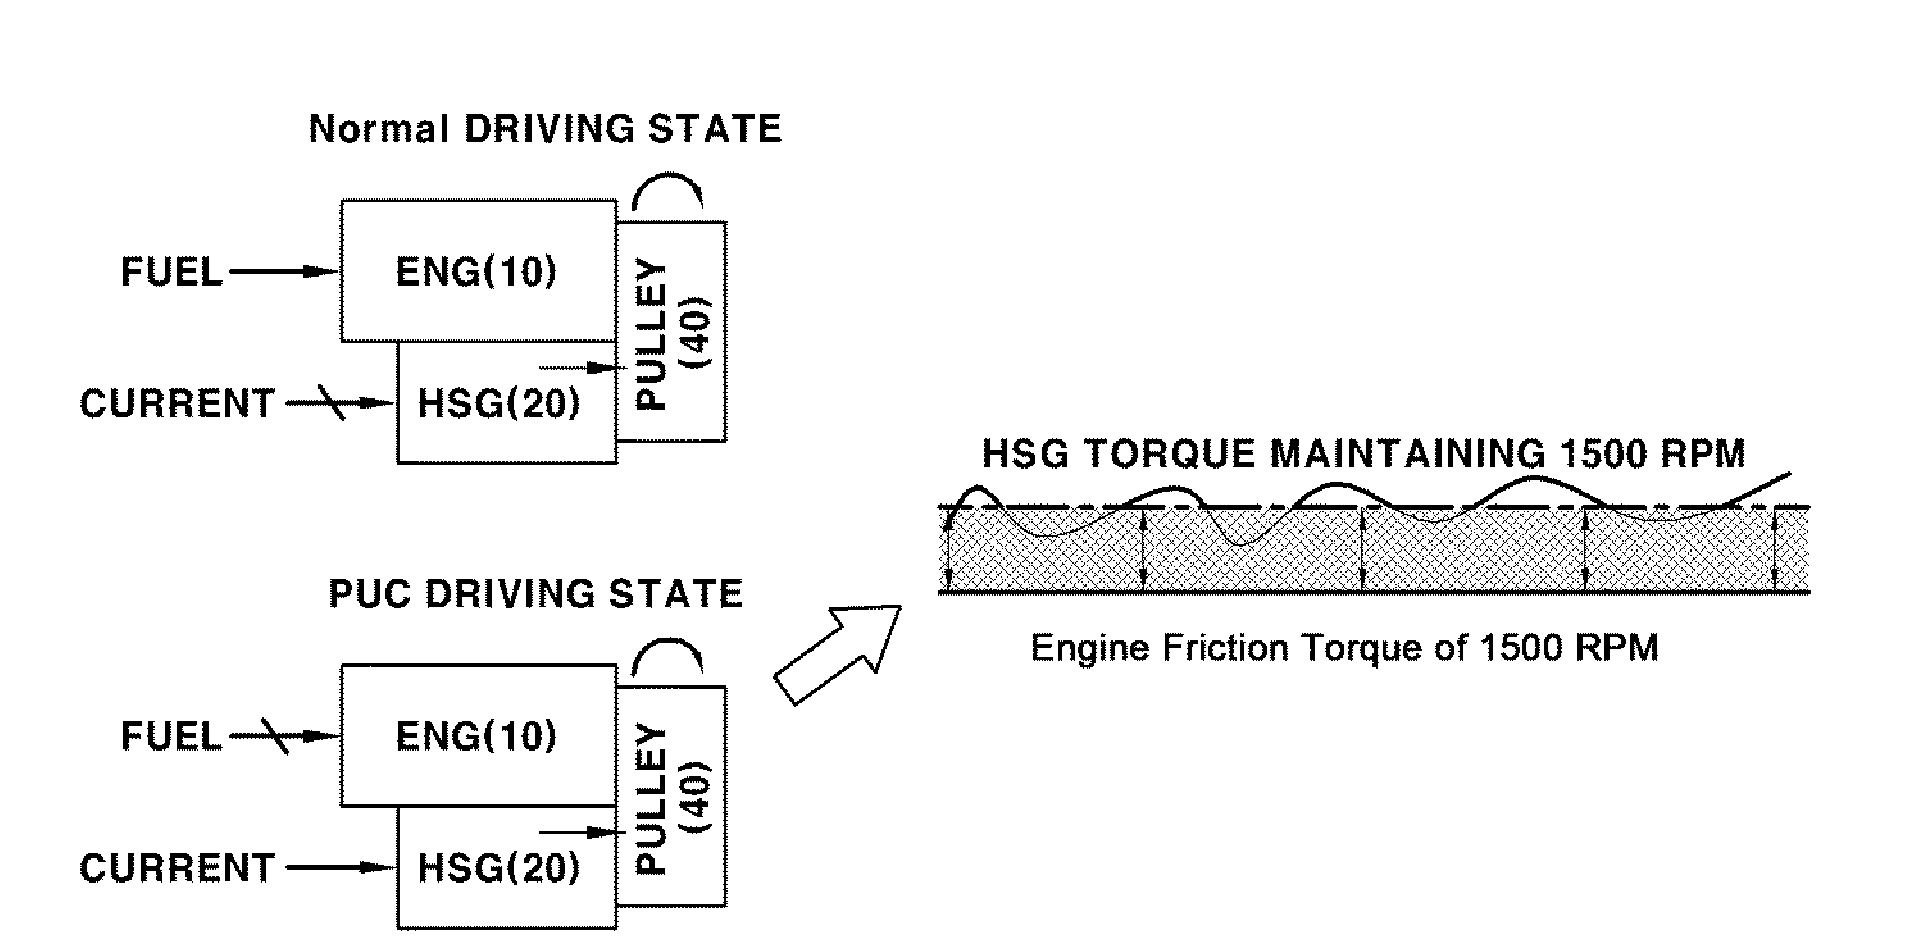 Apparatus and method for learning engine friction torque of hybrid vehicle